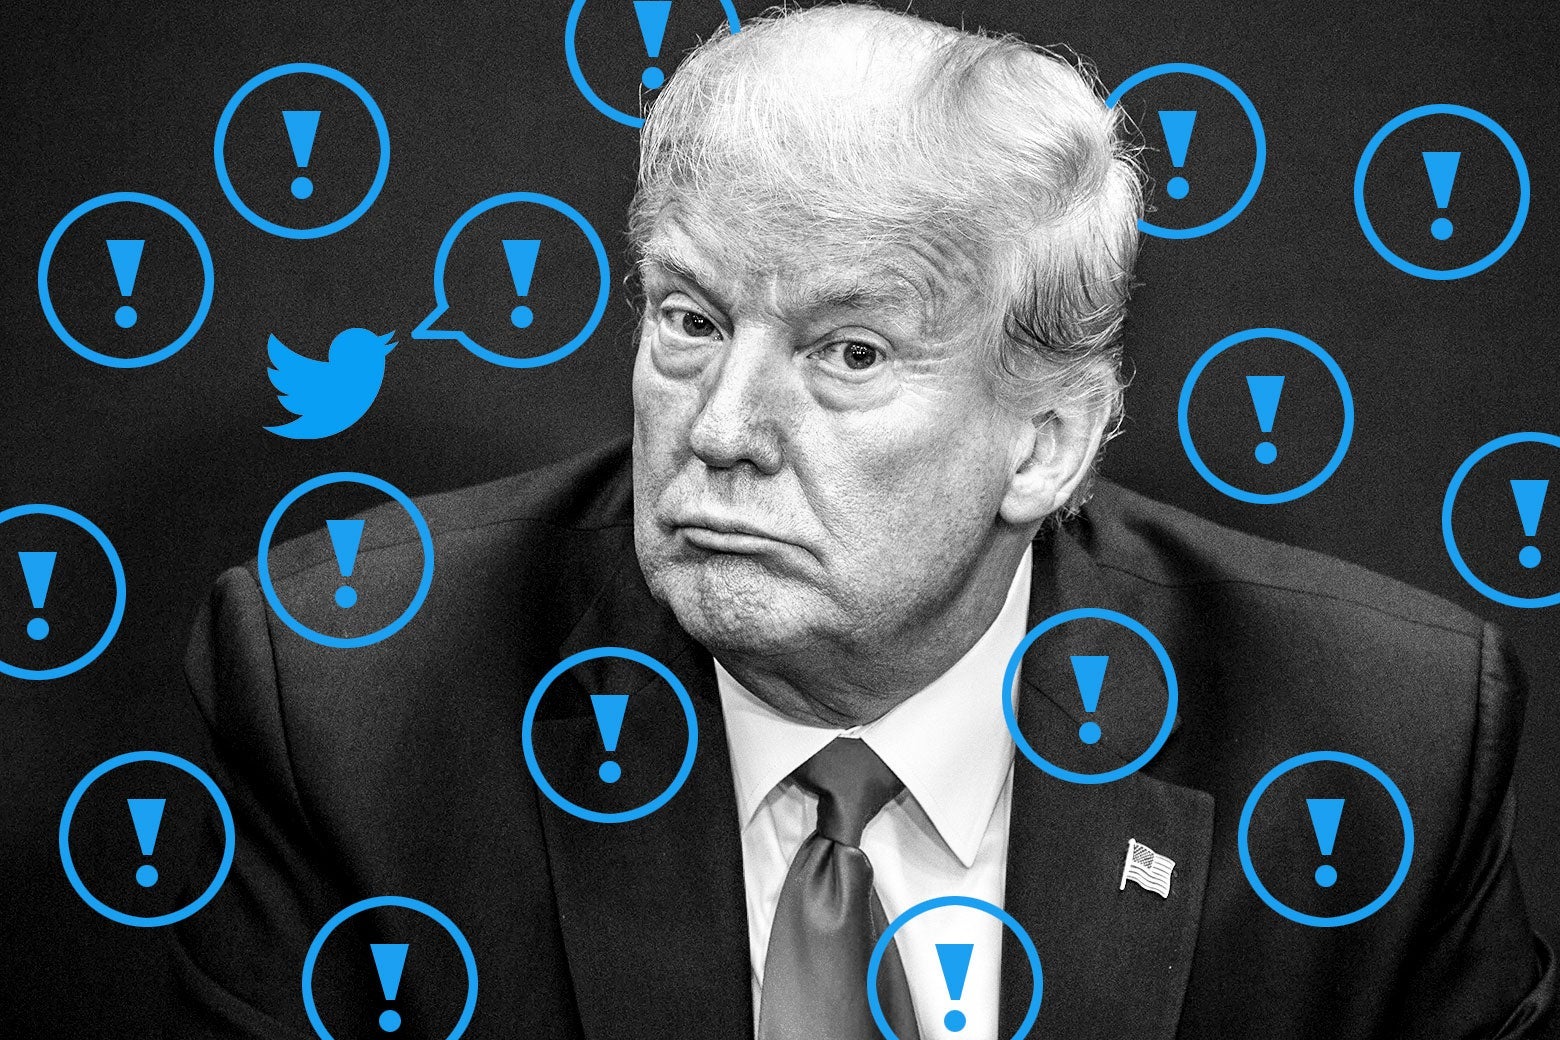 Donald Trump with a blue Twitter logo and blue exclamation marks on top of his photo.